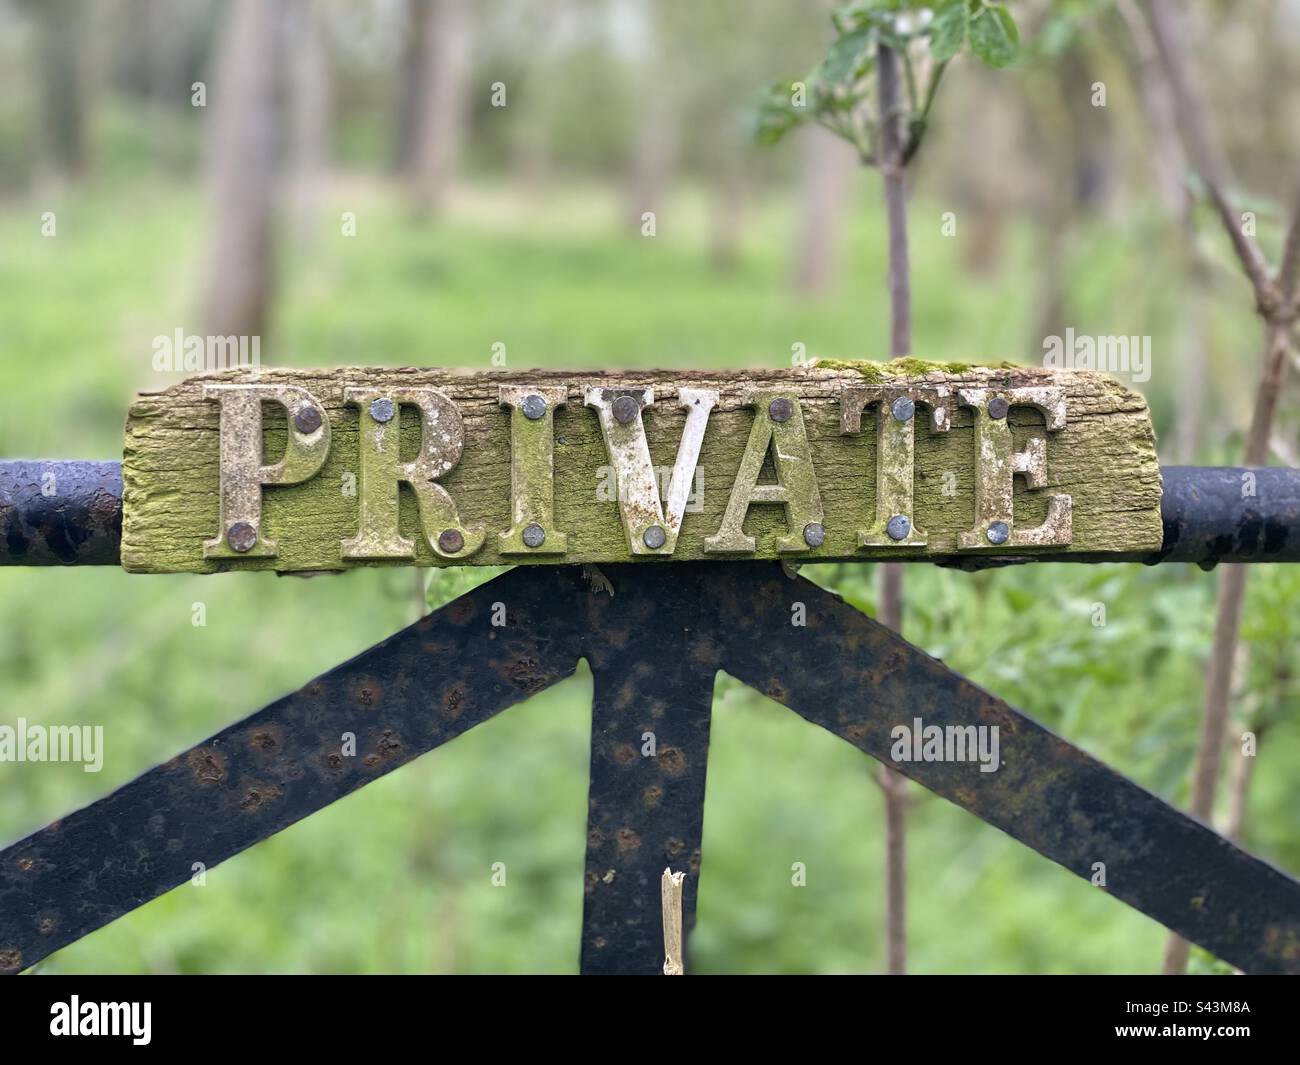 ‘PRIVATE’ sign on old gate in countryside Stock Photo